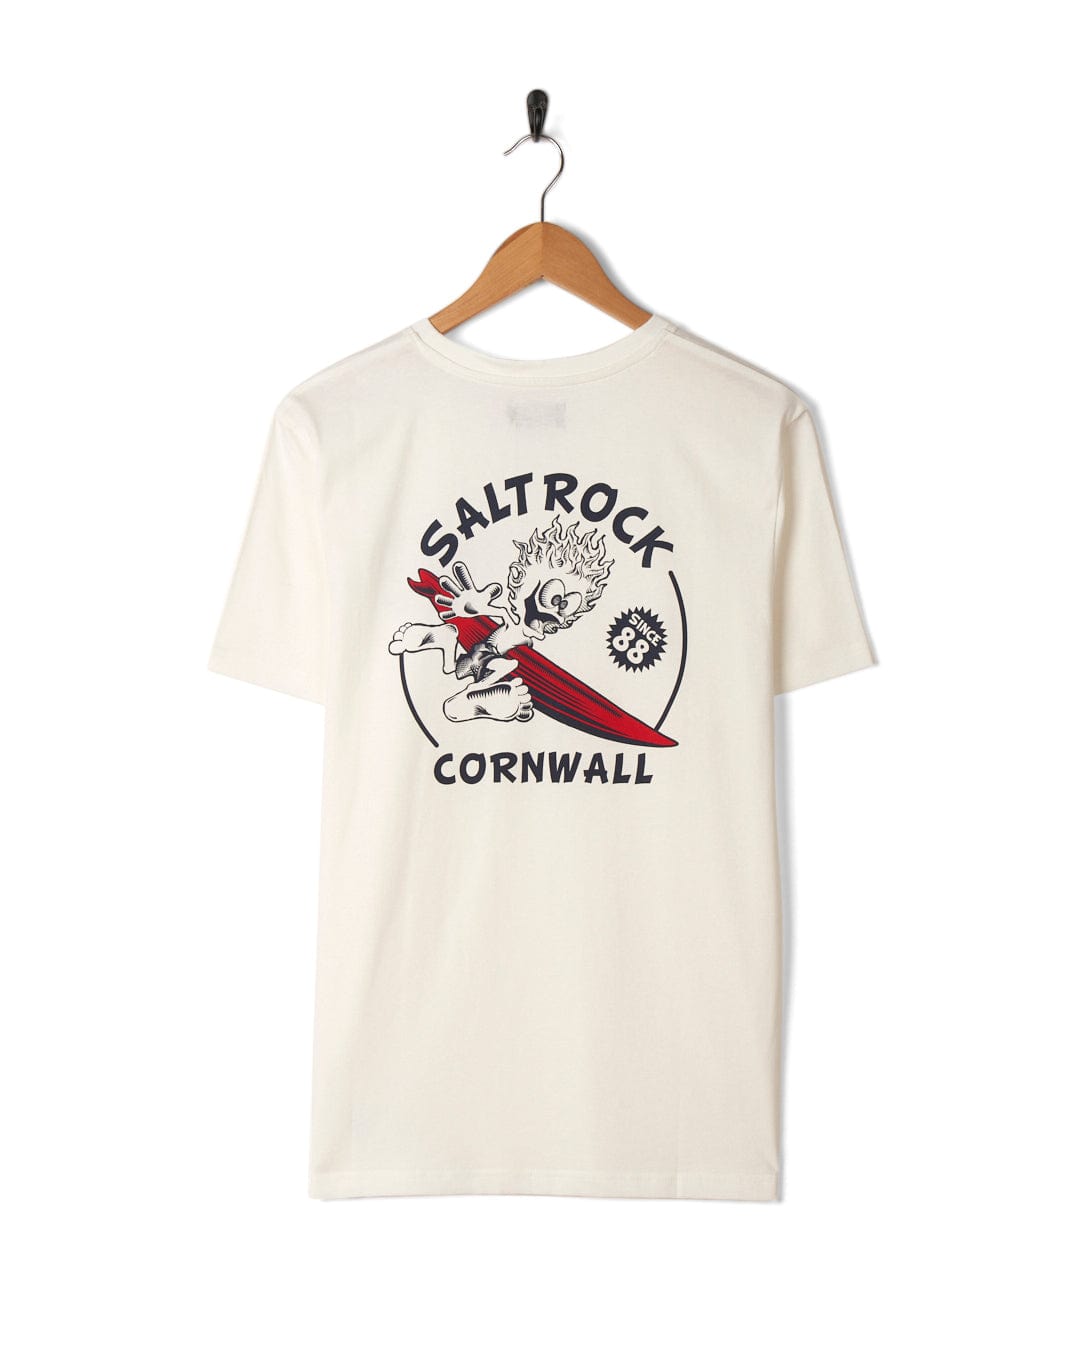 A Wave Rider Cornwall - Mens Short Sleeve - White t-shirt by Saltrock, featuring the surfrock Cornwall design, made from peached soft material.